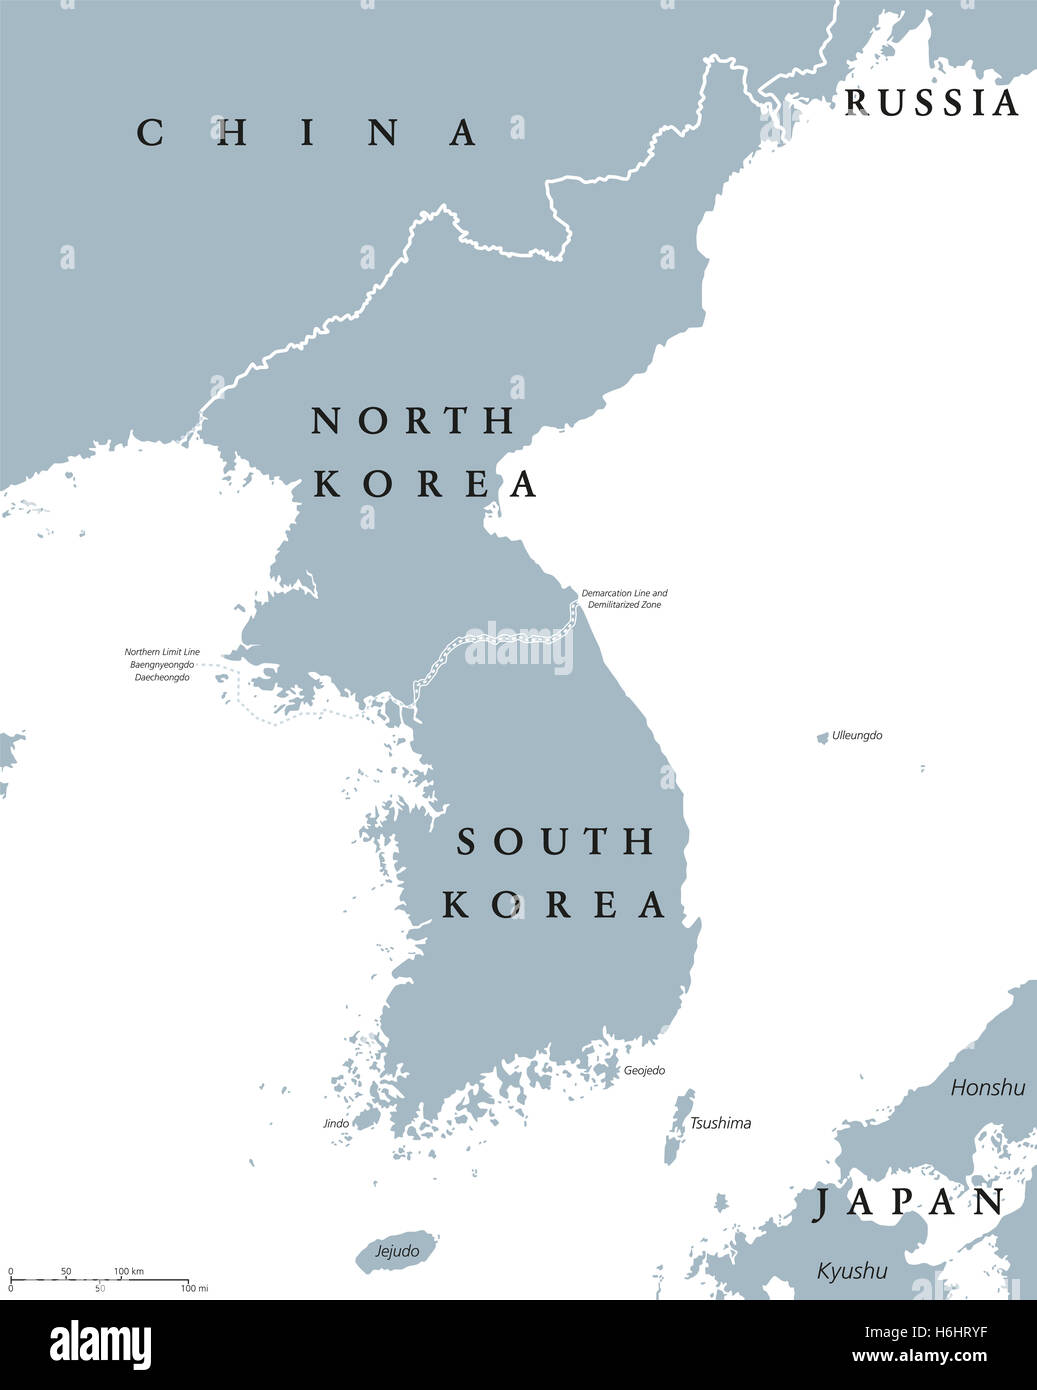 Korean peninsula countries political map with North and South Korea and national borders. Gray illustration, English labeling. Stock Photo